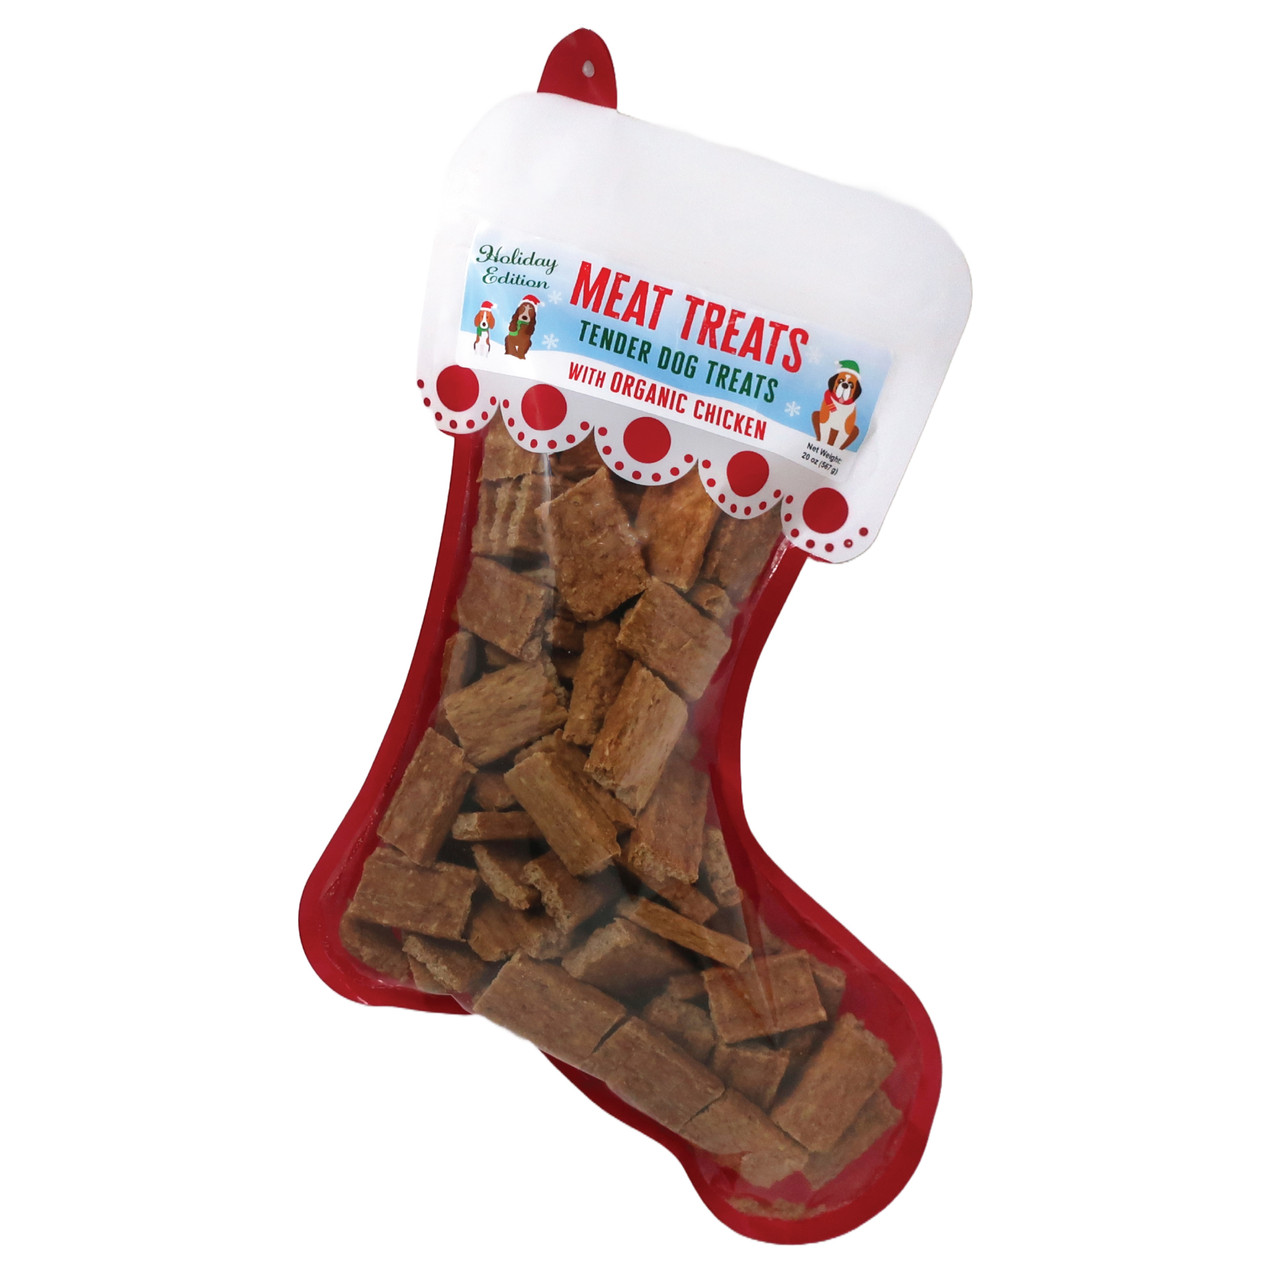 Image of Meat Treats Tender Dog Treats with Organic Chicken - Holiday Stocking